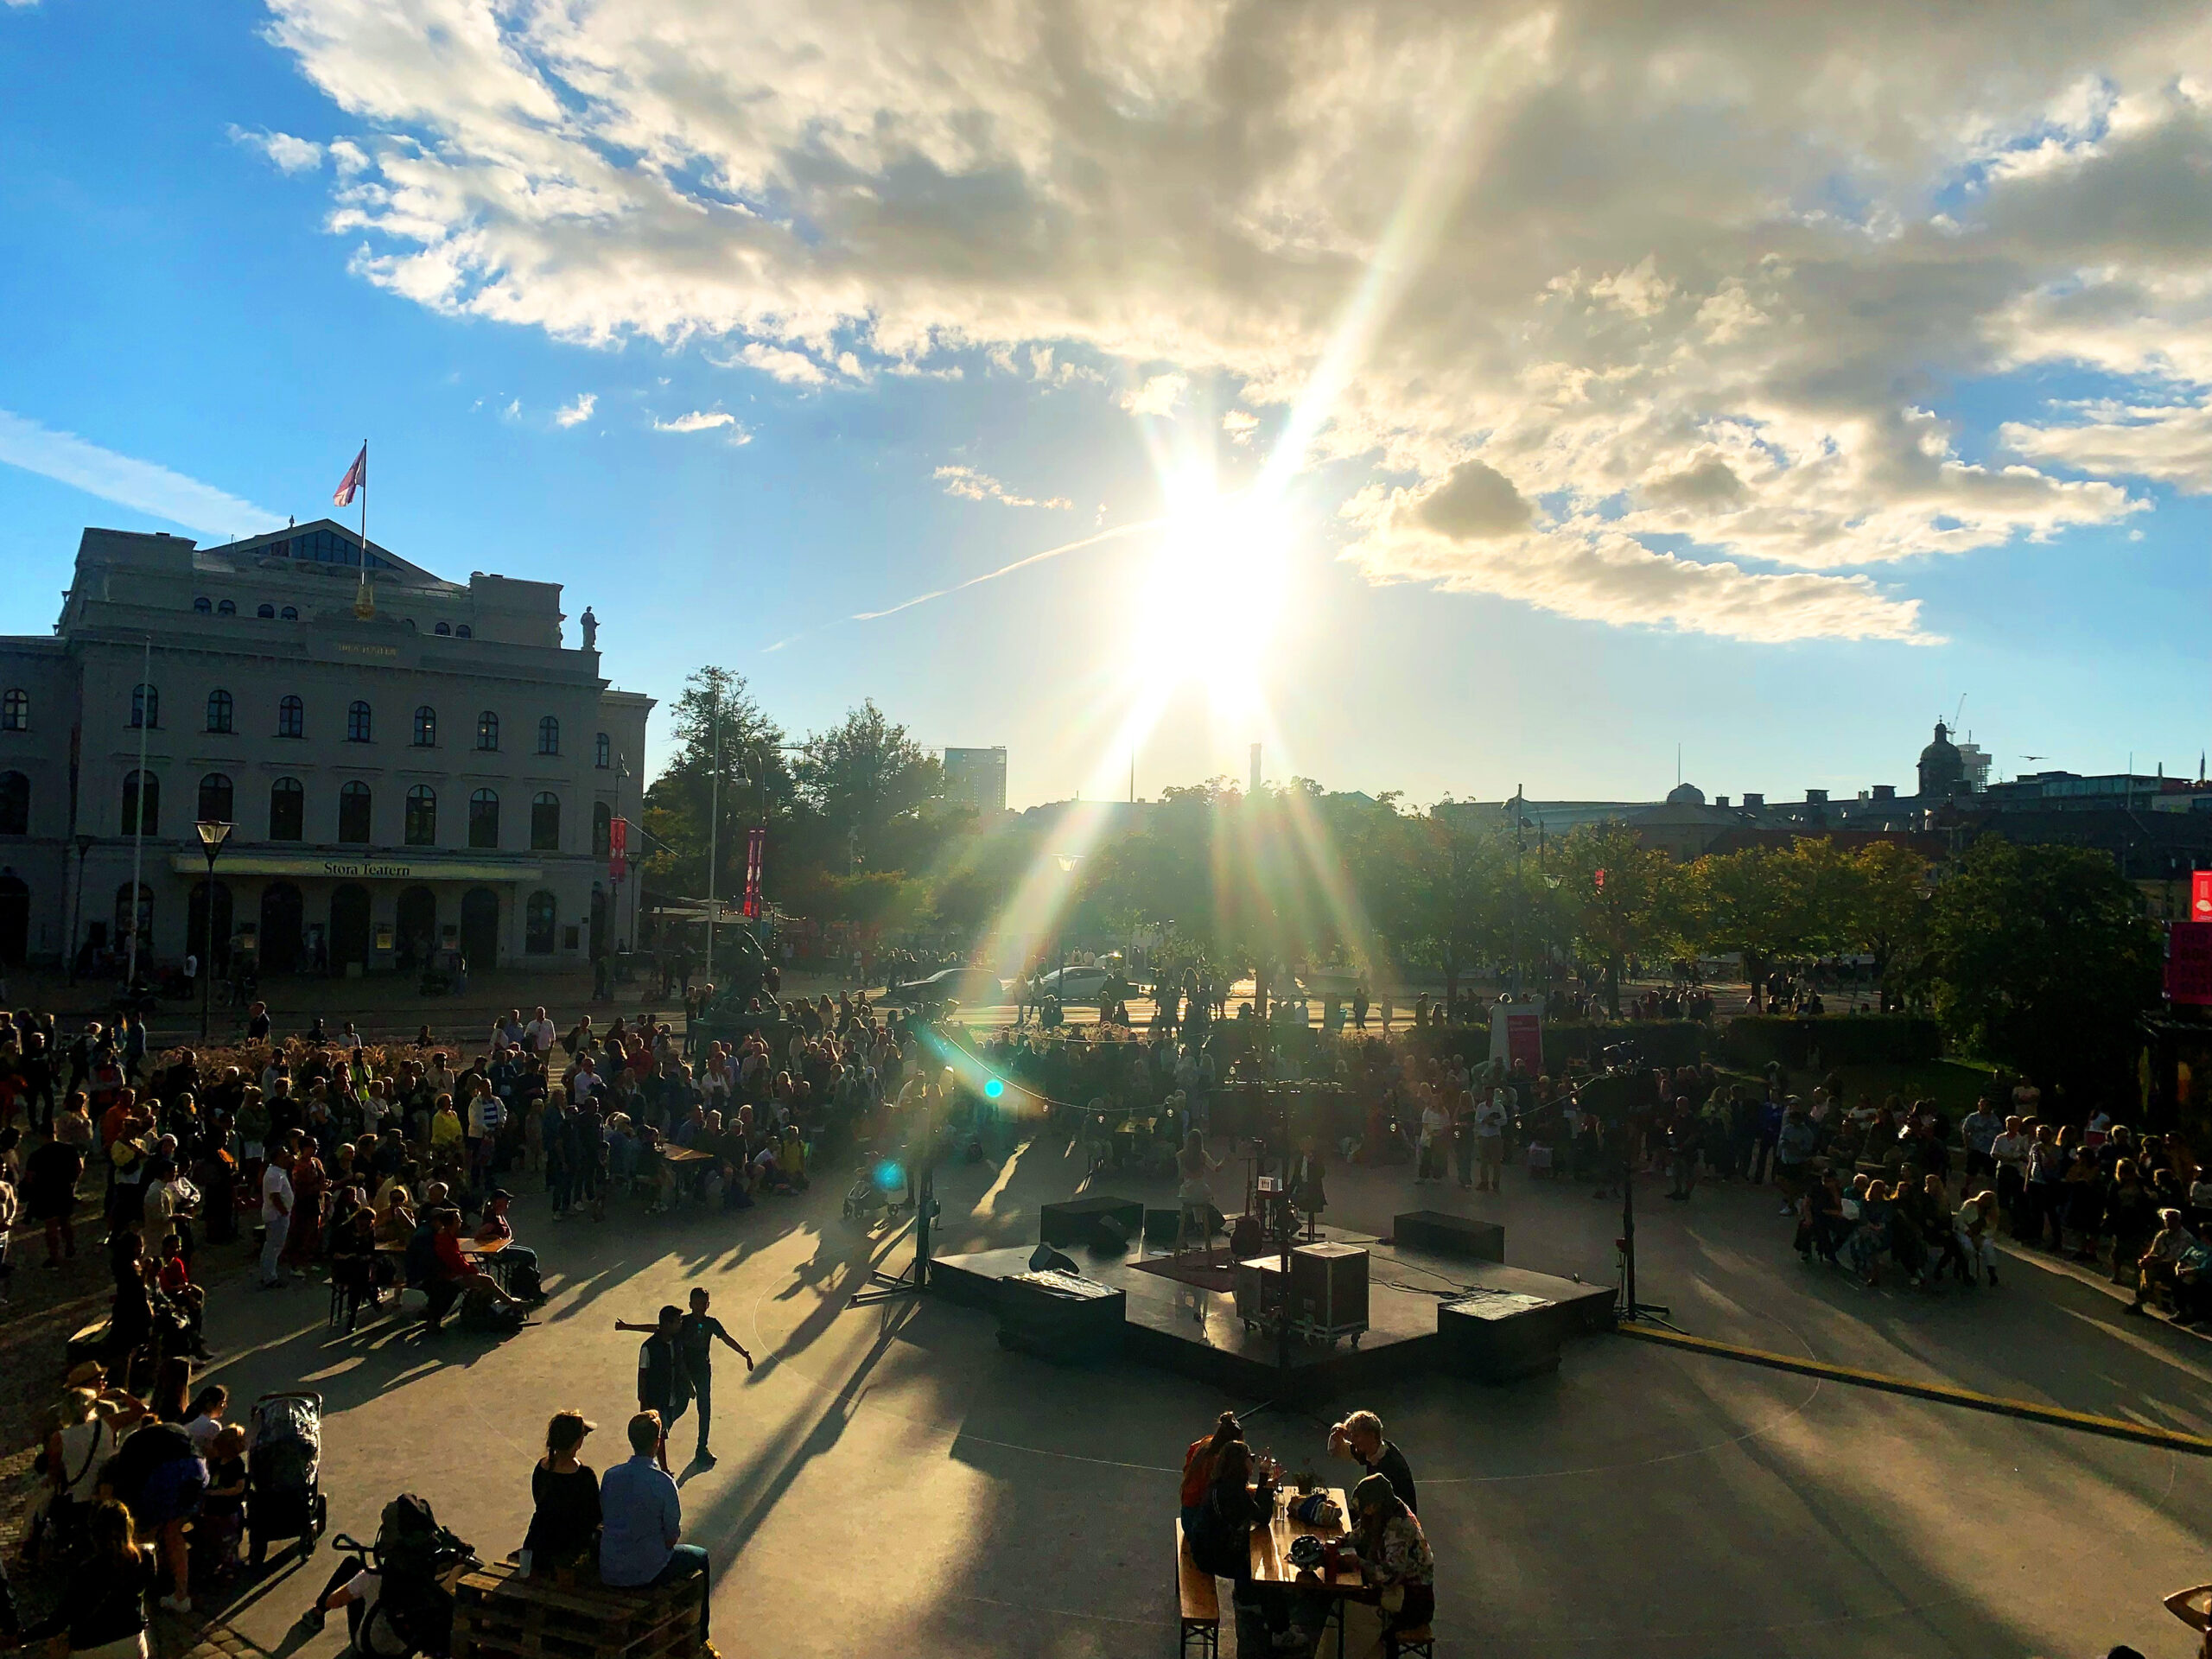 In the middle of a park there is an open stage. Around the stage people are waiting for the next performer. Sun is setting and makes a warm light. In the left of the photo theres a large, old building known as Stora Teatern.